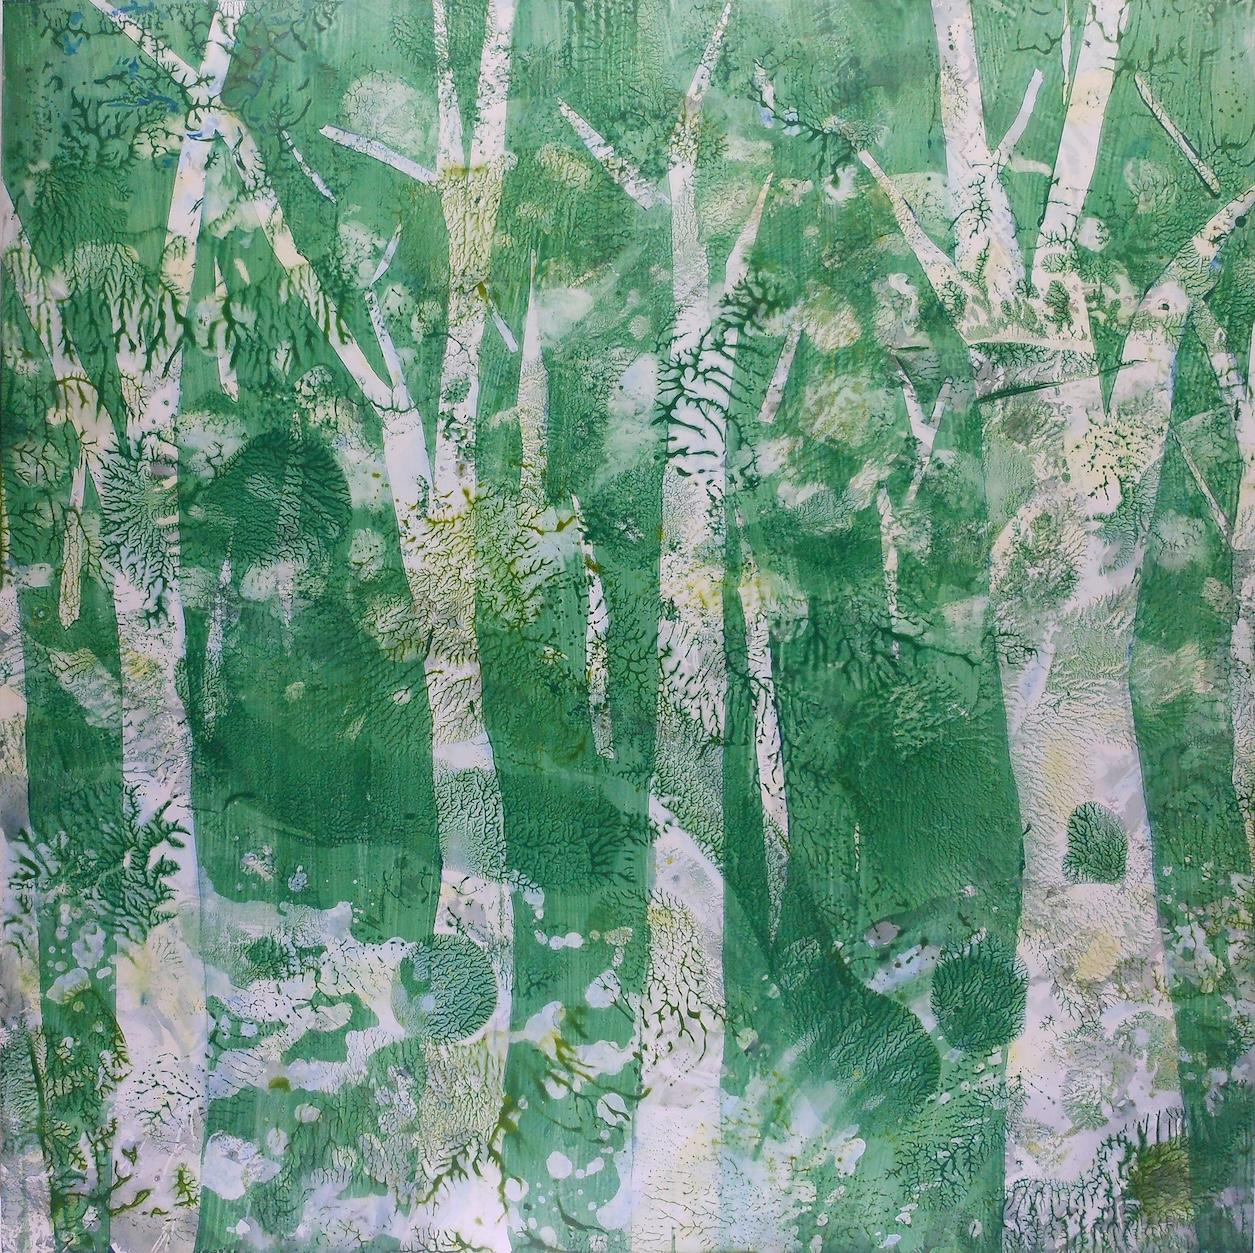 Marlene Struss Abstract Painting - Green Geishas - Abstract Tree Painting